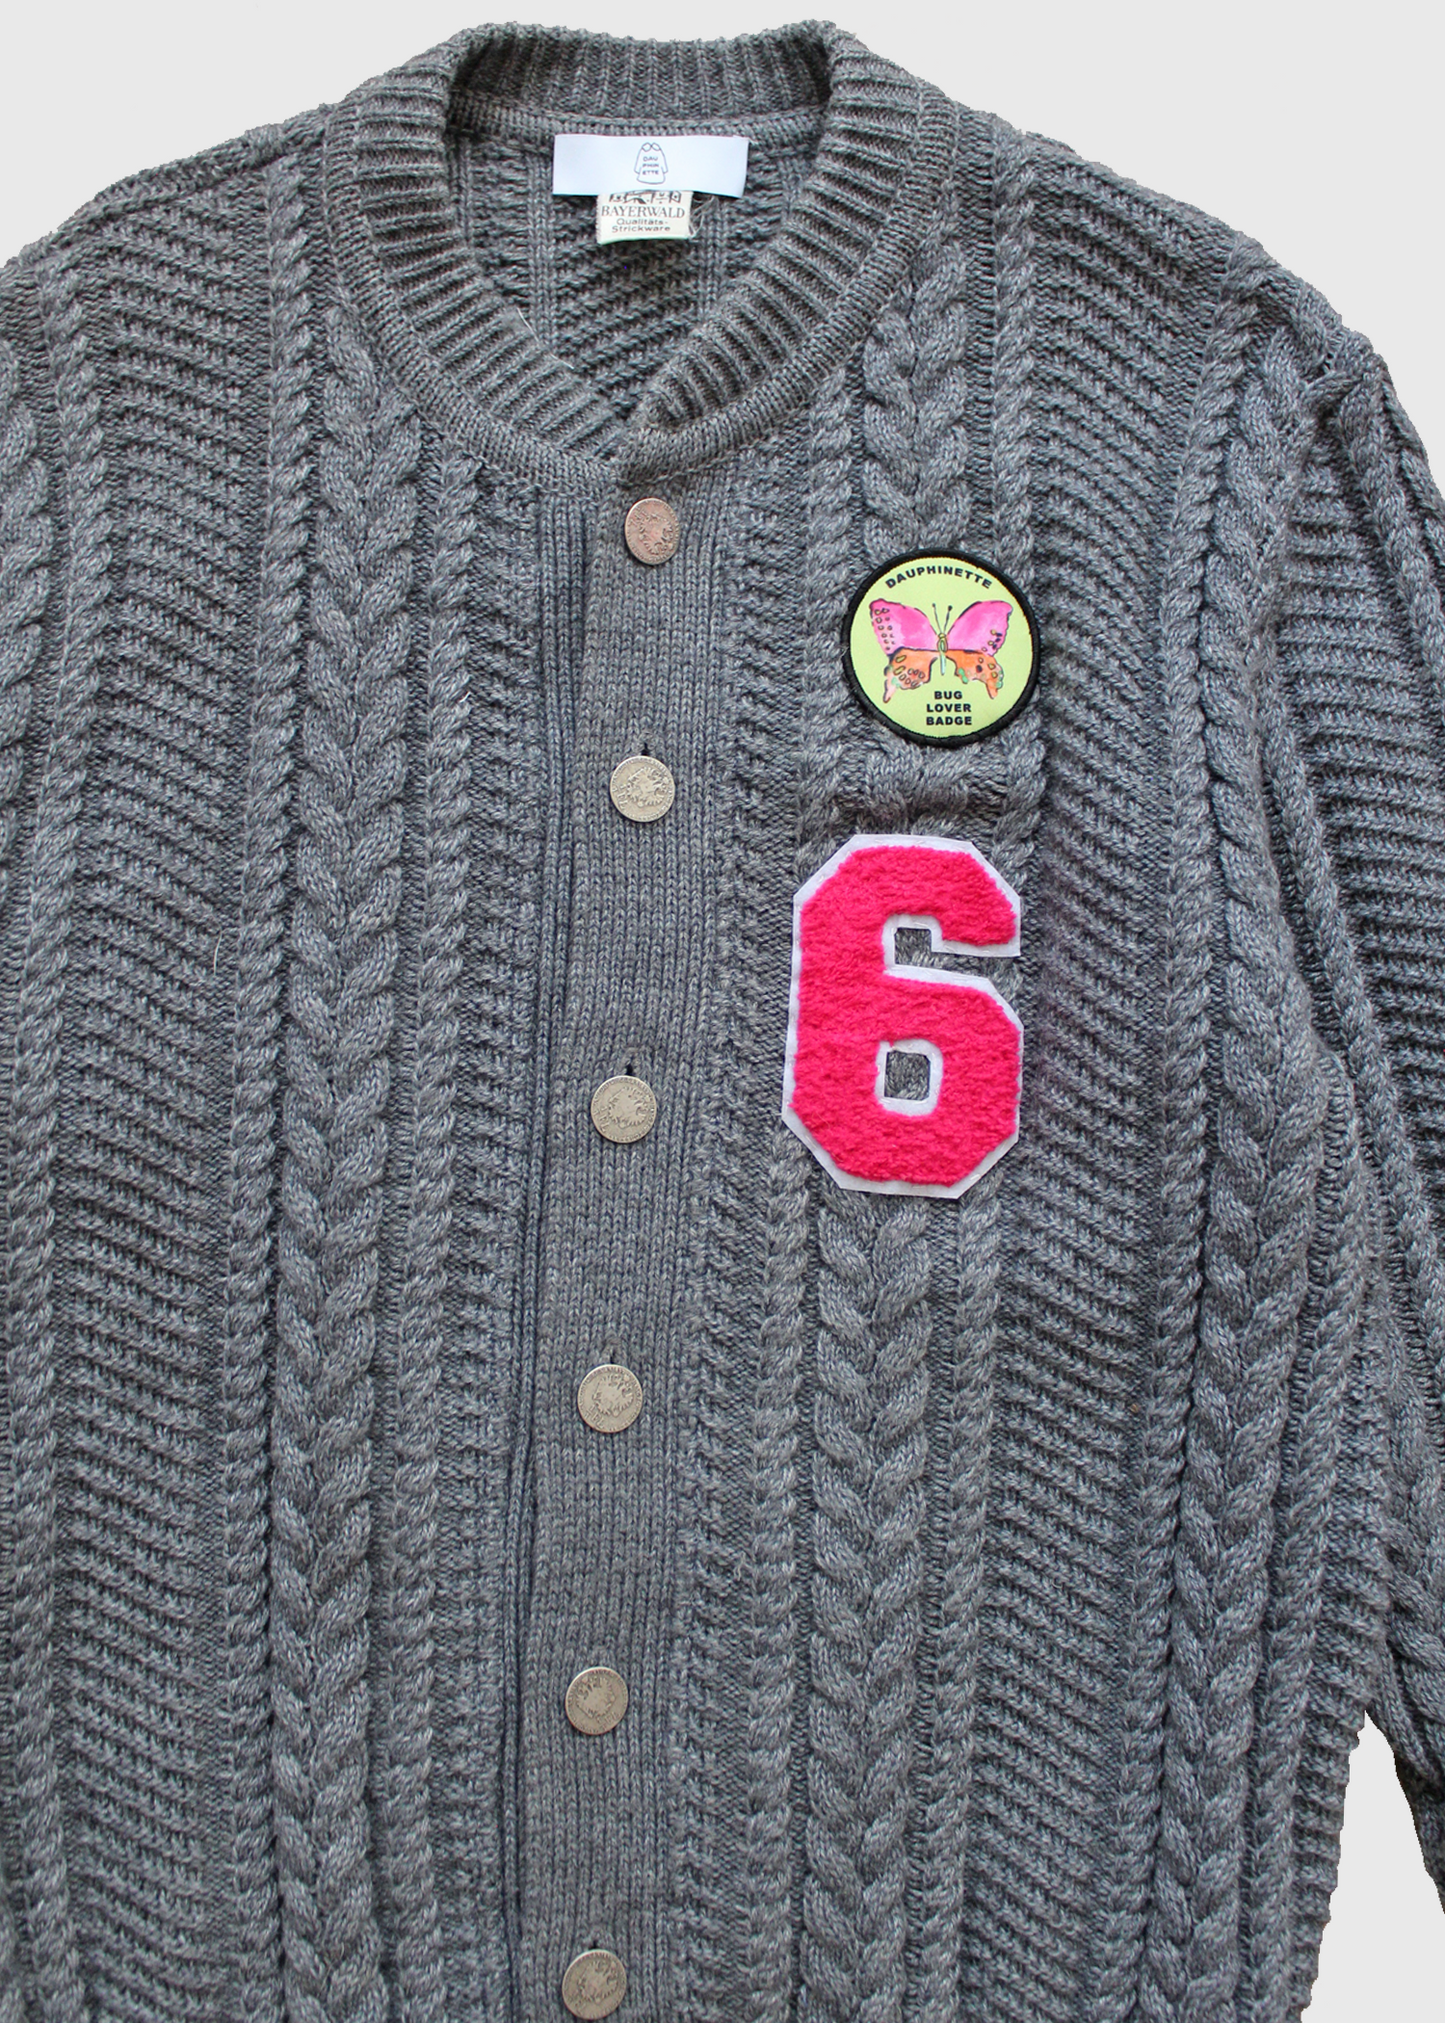 Dauphinette Scout Cardigan with Patches